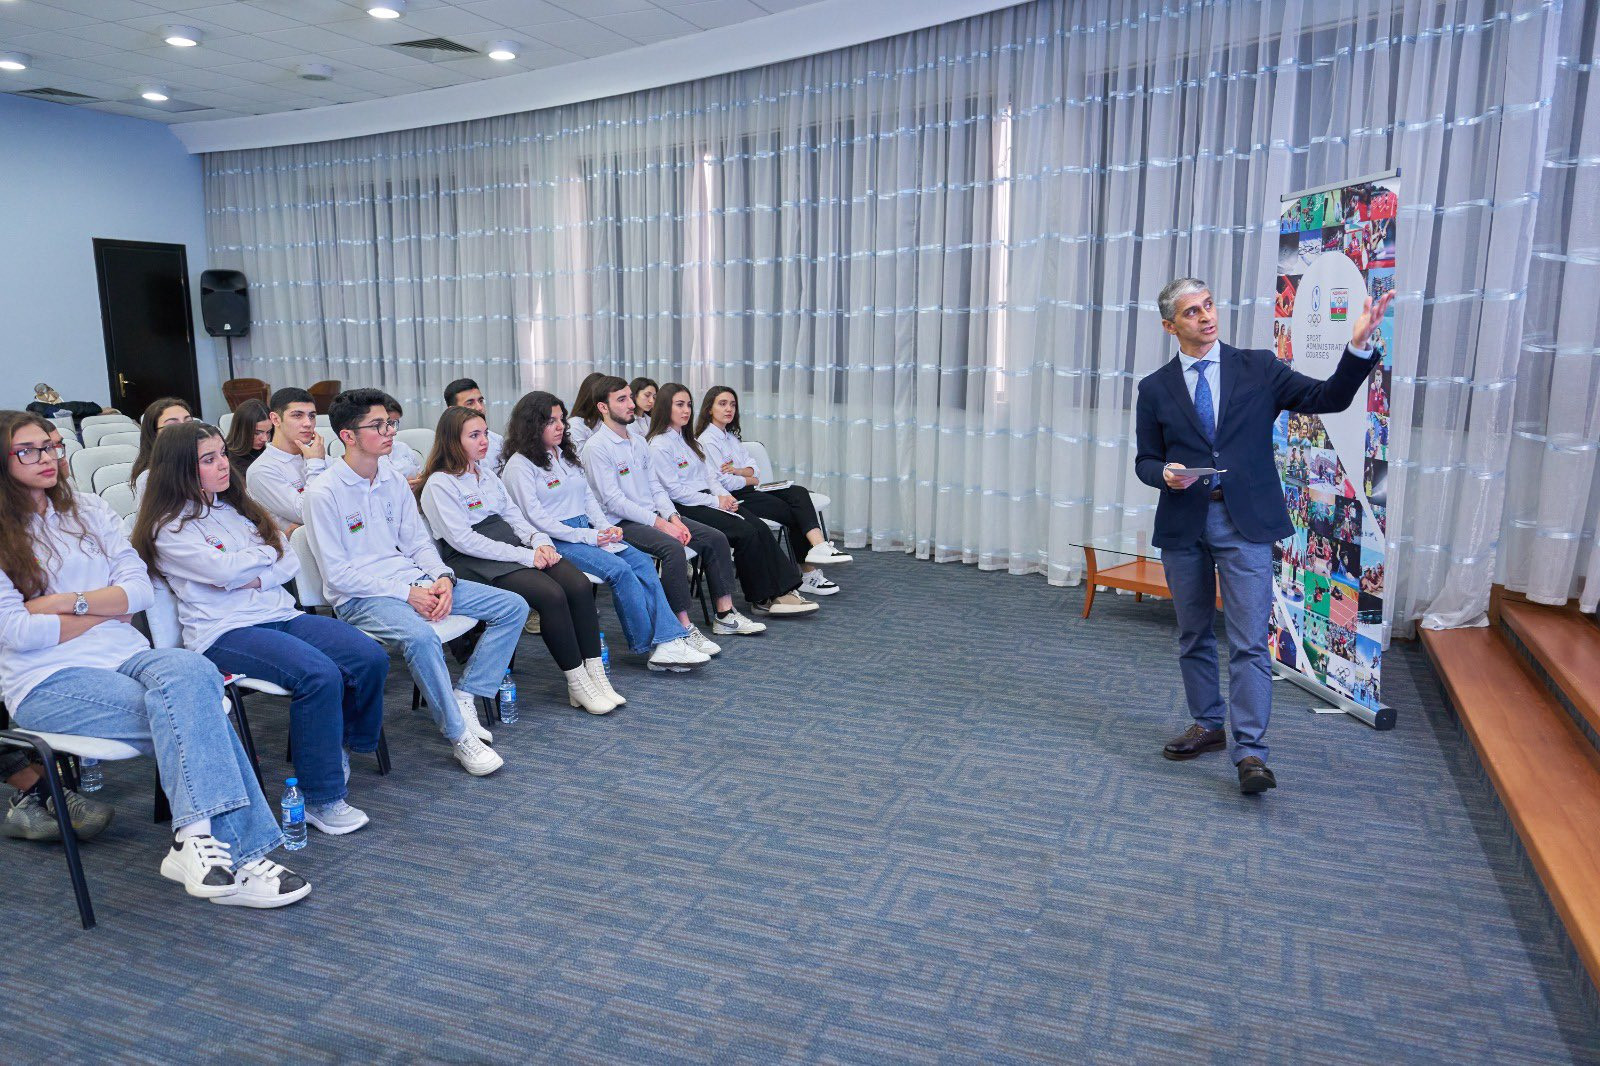 In the courses, a total of 40 students participated with the requirement to uphold gender equality. NOC Azerbaijan